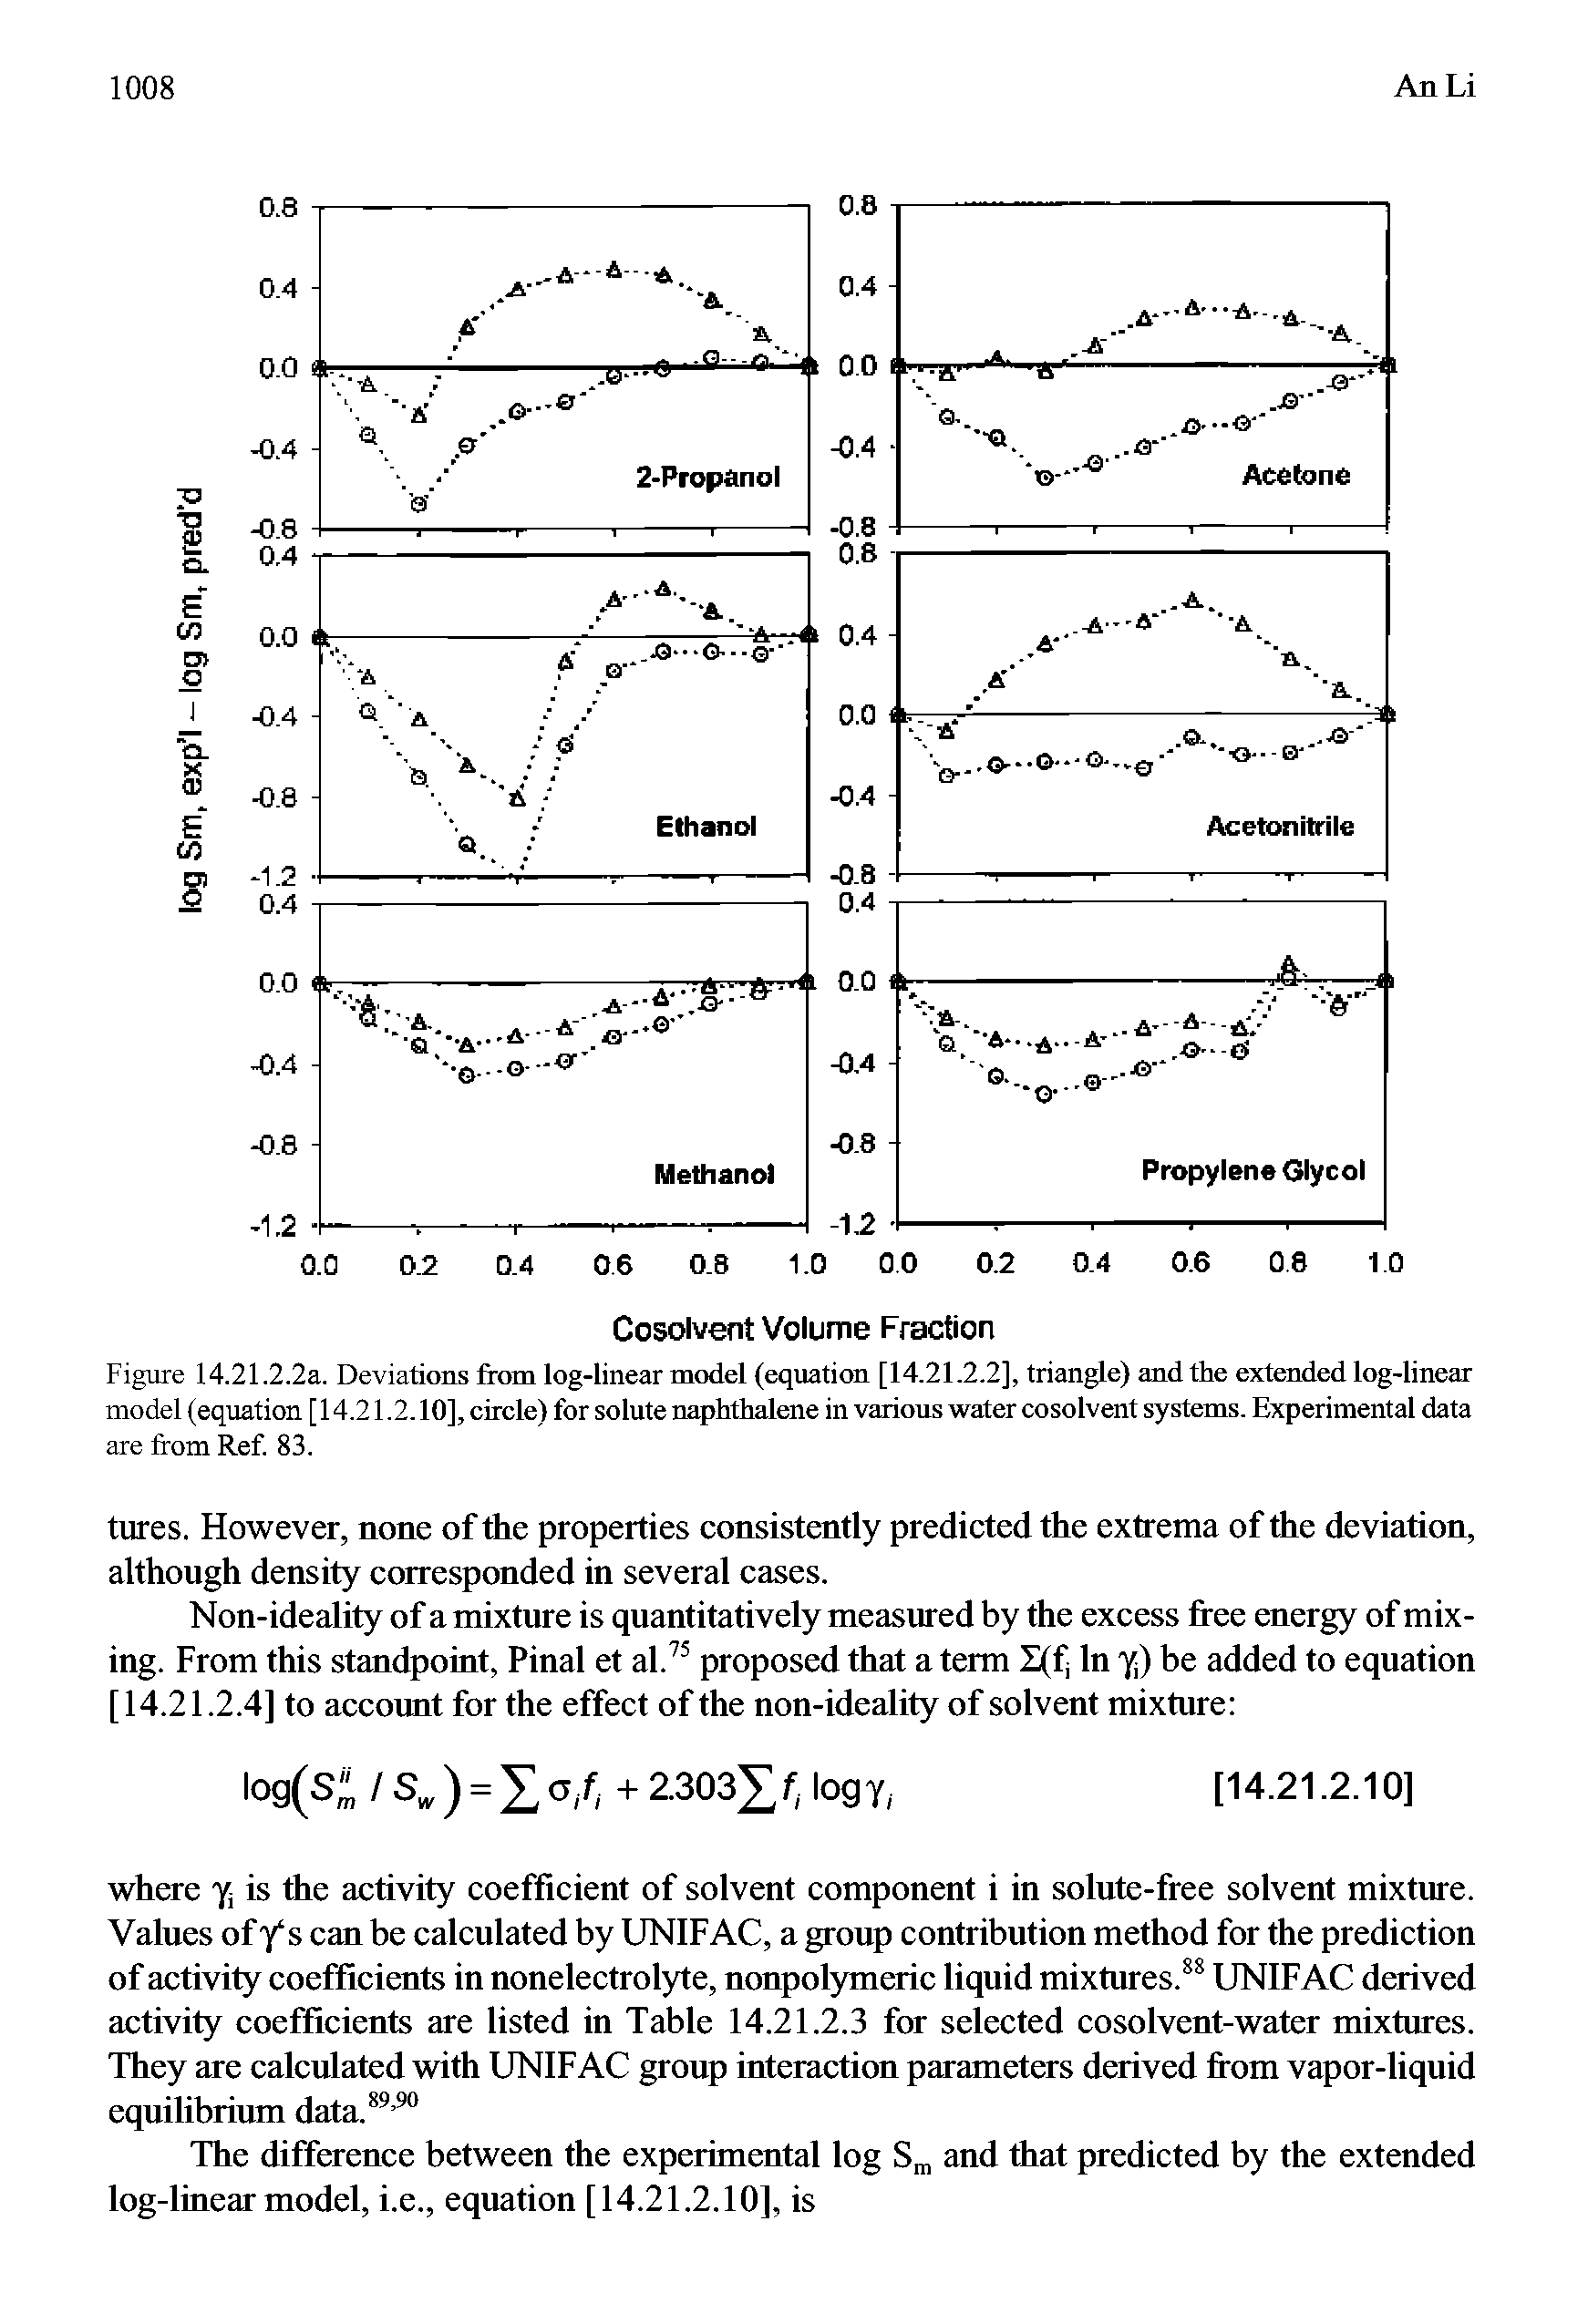 Figure 14.21.2.2a. Deviations from log-linear model (equation [14.21.2.2], triangle) and the extended log-linear model (equation [14.21.2.10], circle) for solute naphthalene in various water cosolvent systems. Experimental data are from Ref. 83.